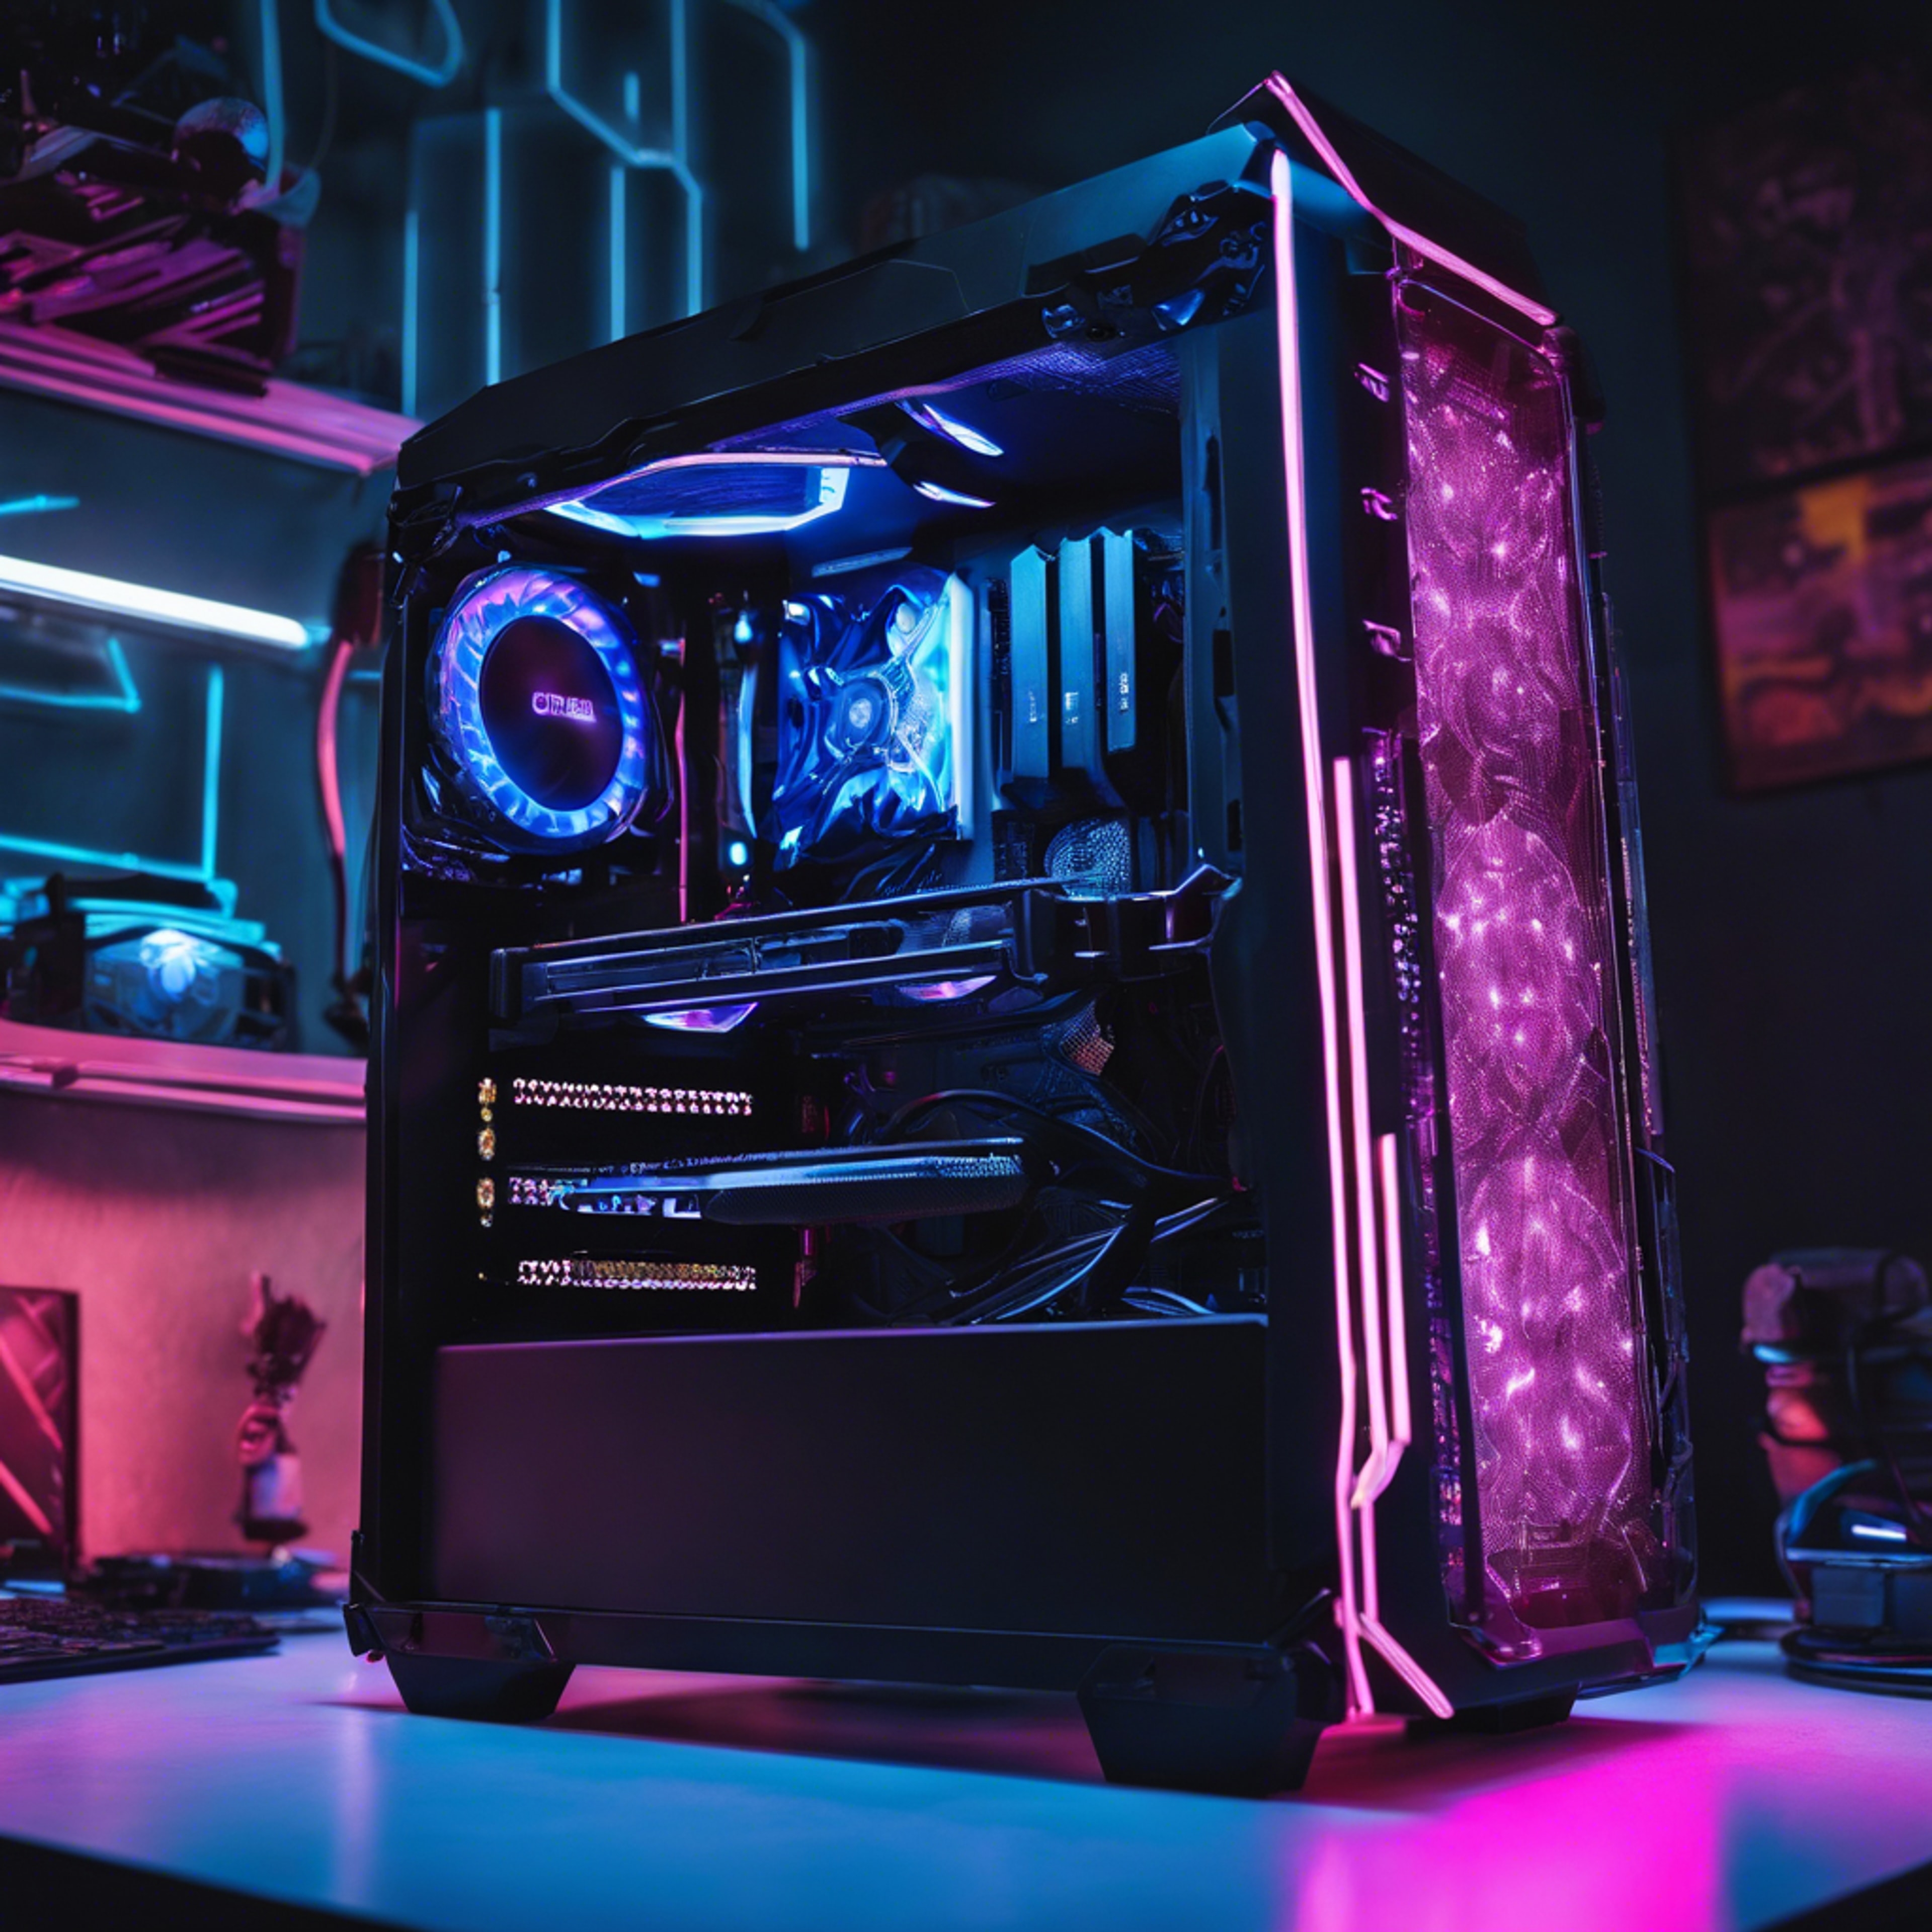 A cyberpunk-style black gaming PC with neon blue LED lights. Tapetai[4f1d7ee7161d4e2894f4]